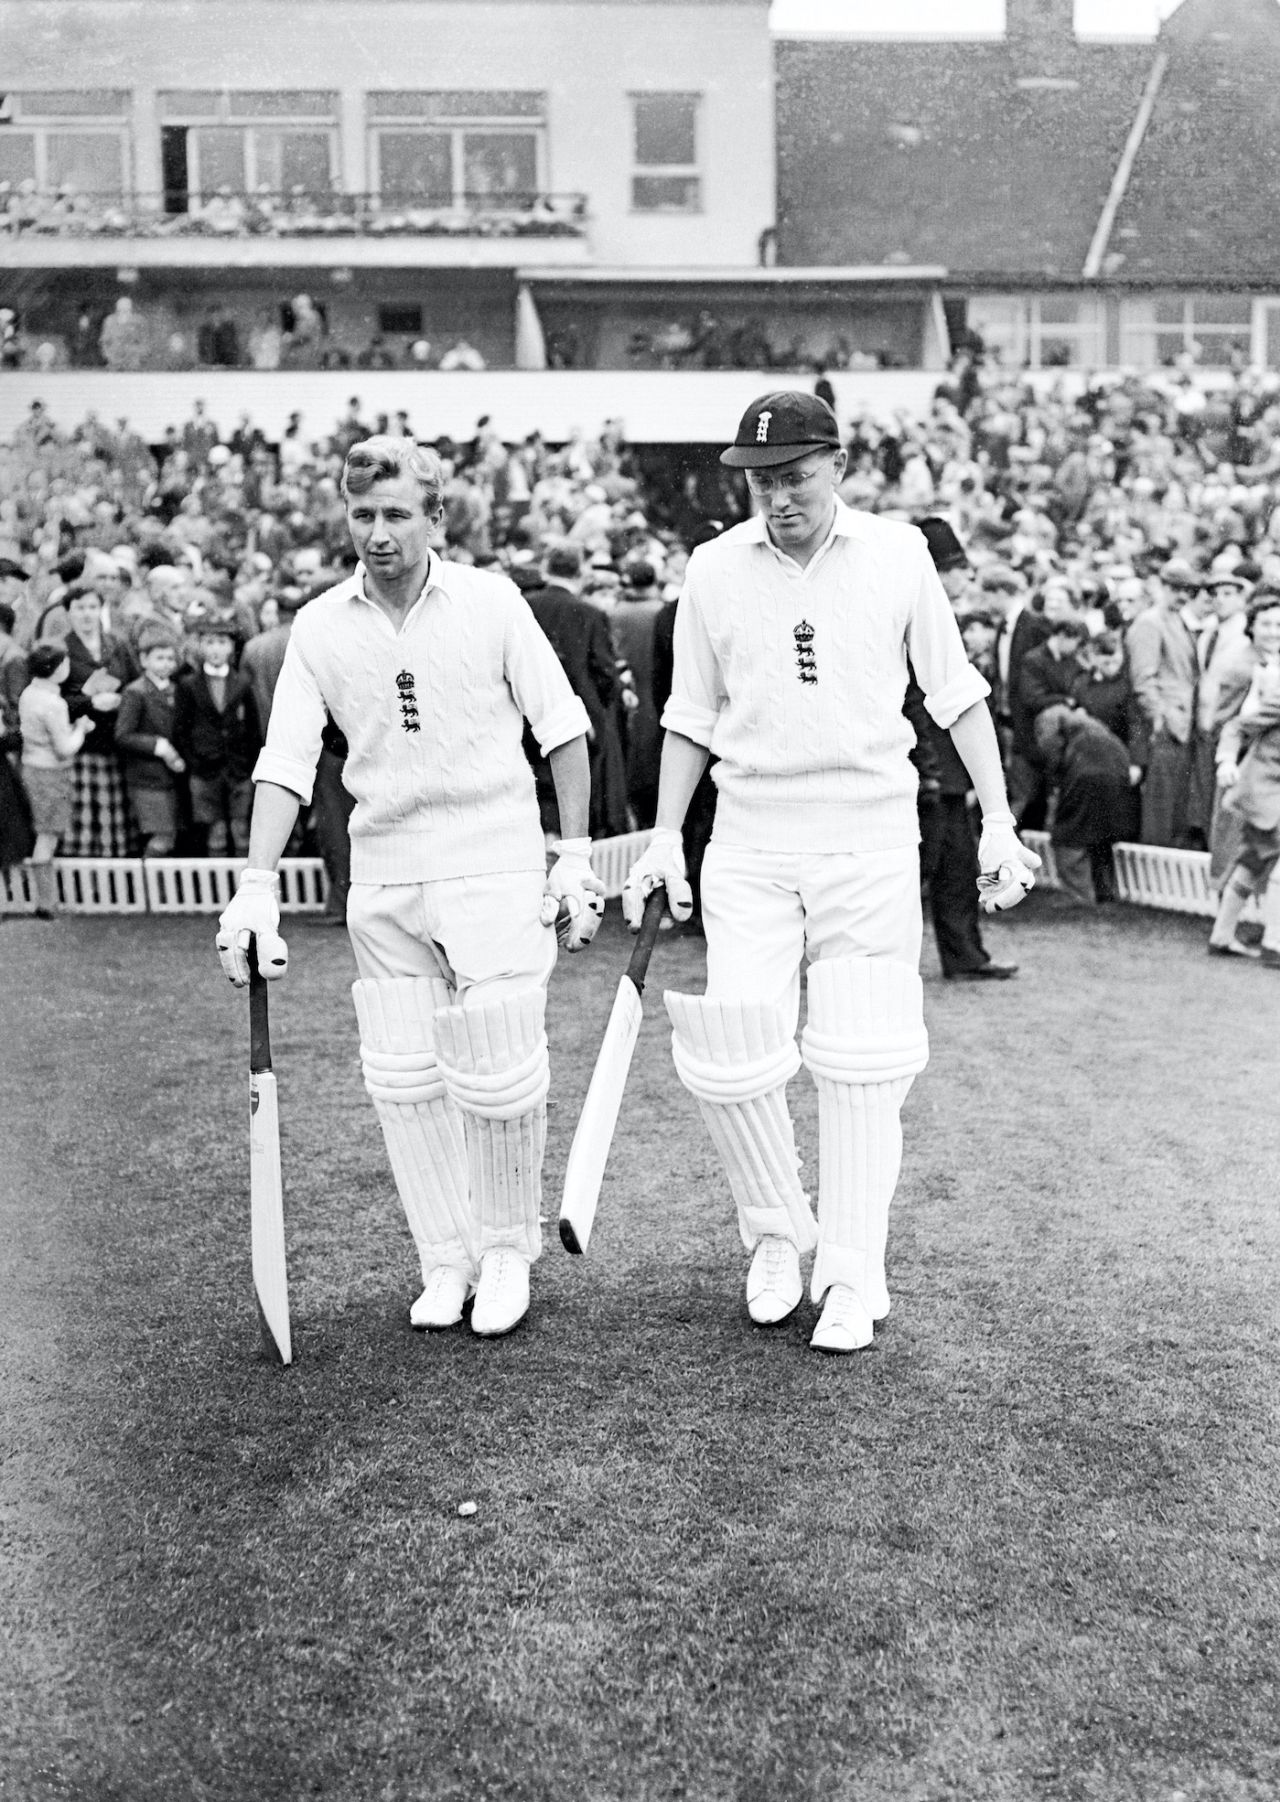 Arthur Milton (left) and Mike Smith walk out to open the batting in England's first innings, third day, third Test, England vs New Zealand, Headingley, July 05, 1958